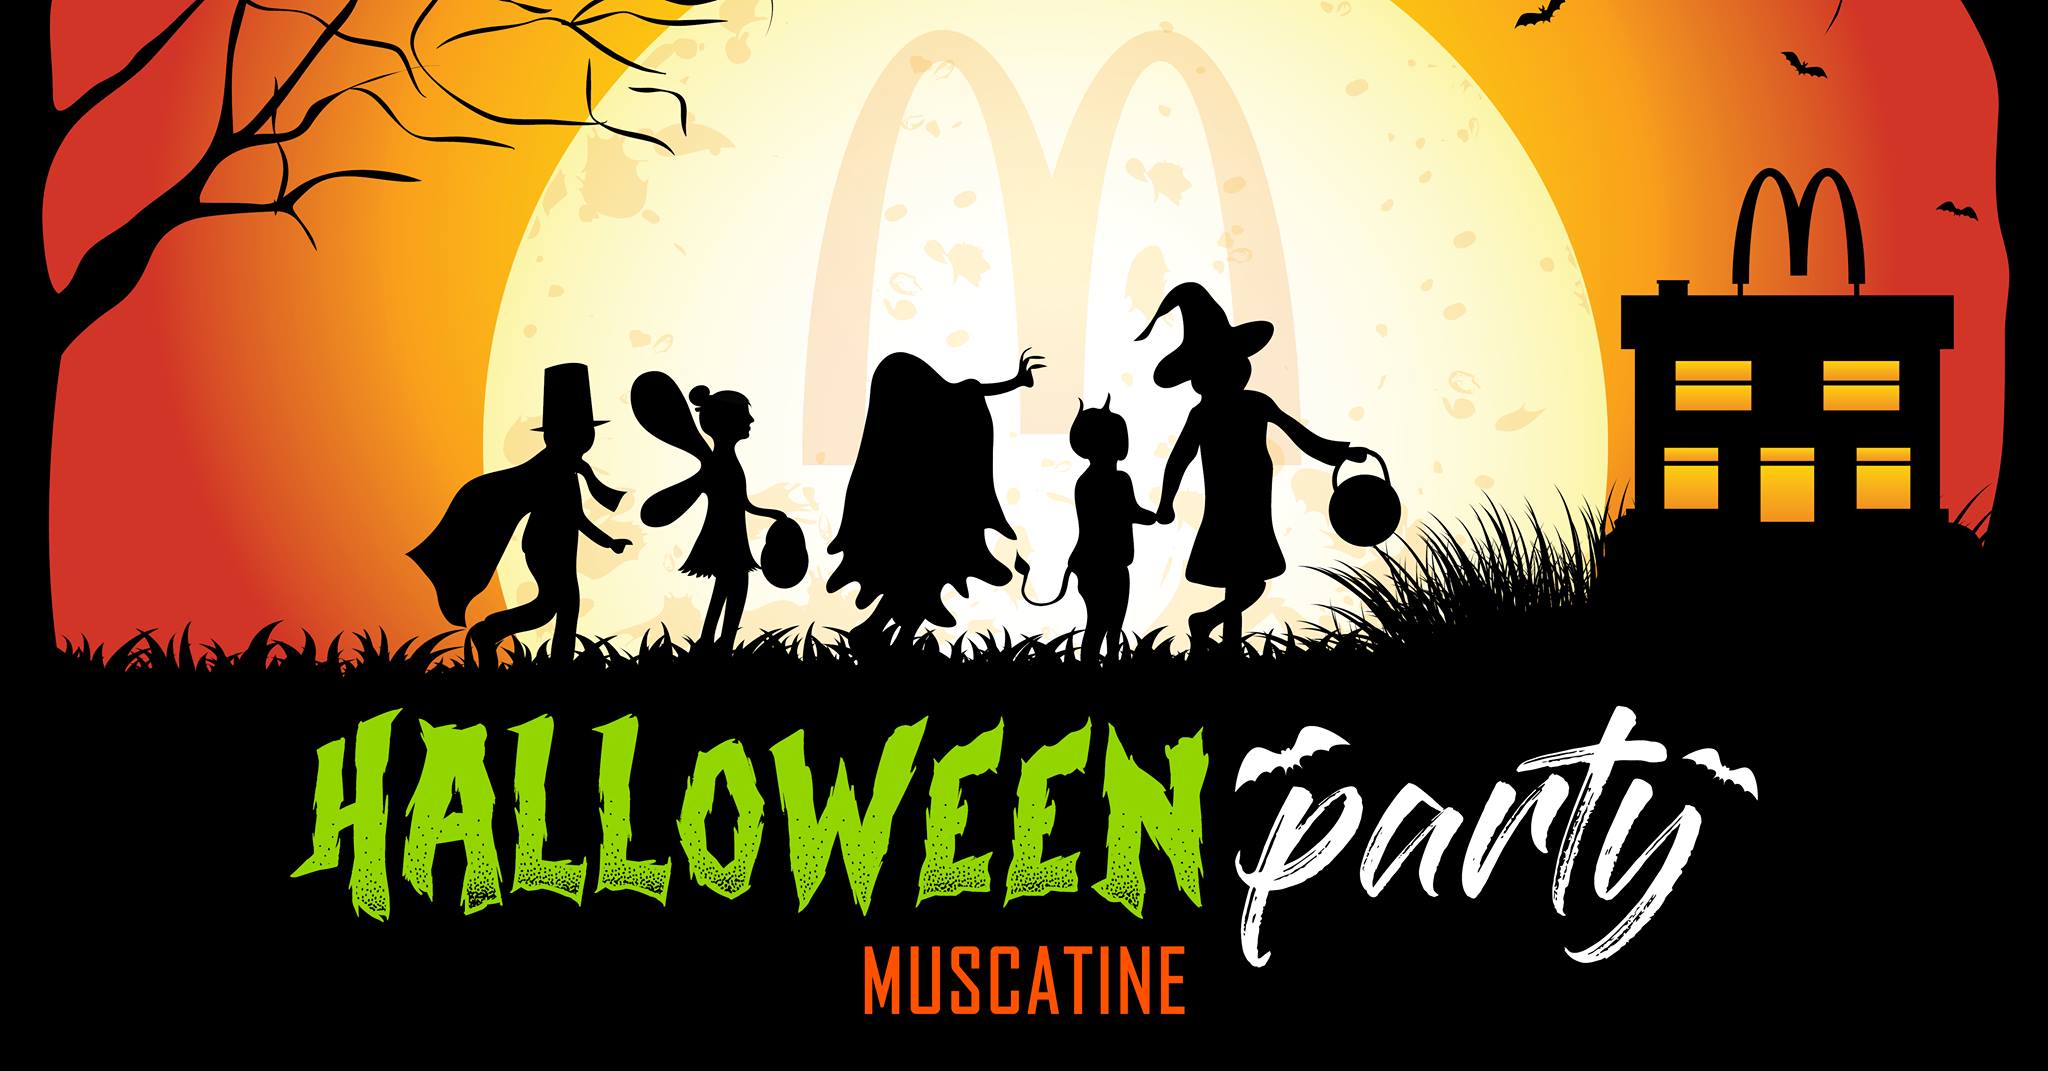 Muscatine Halloween party